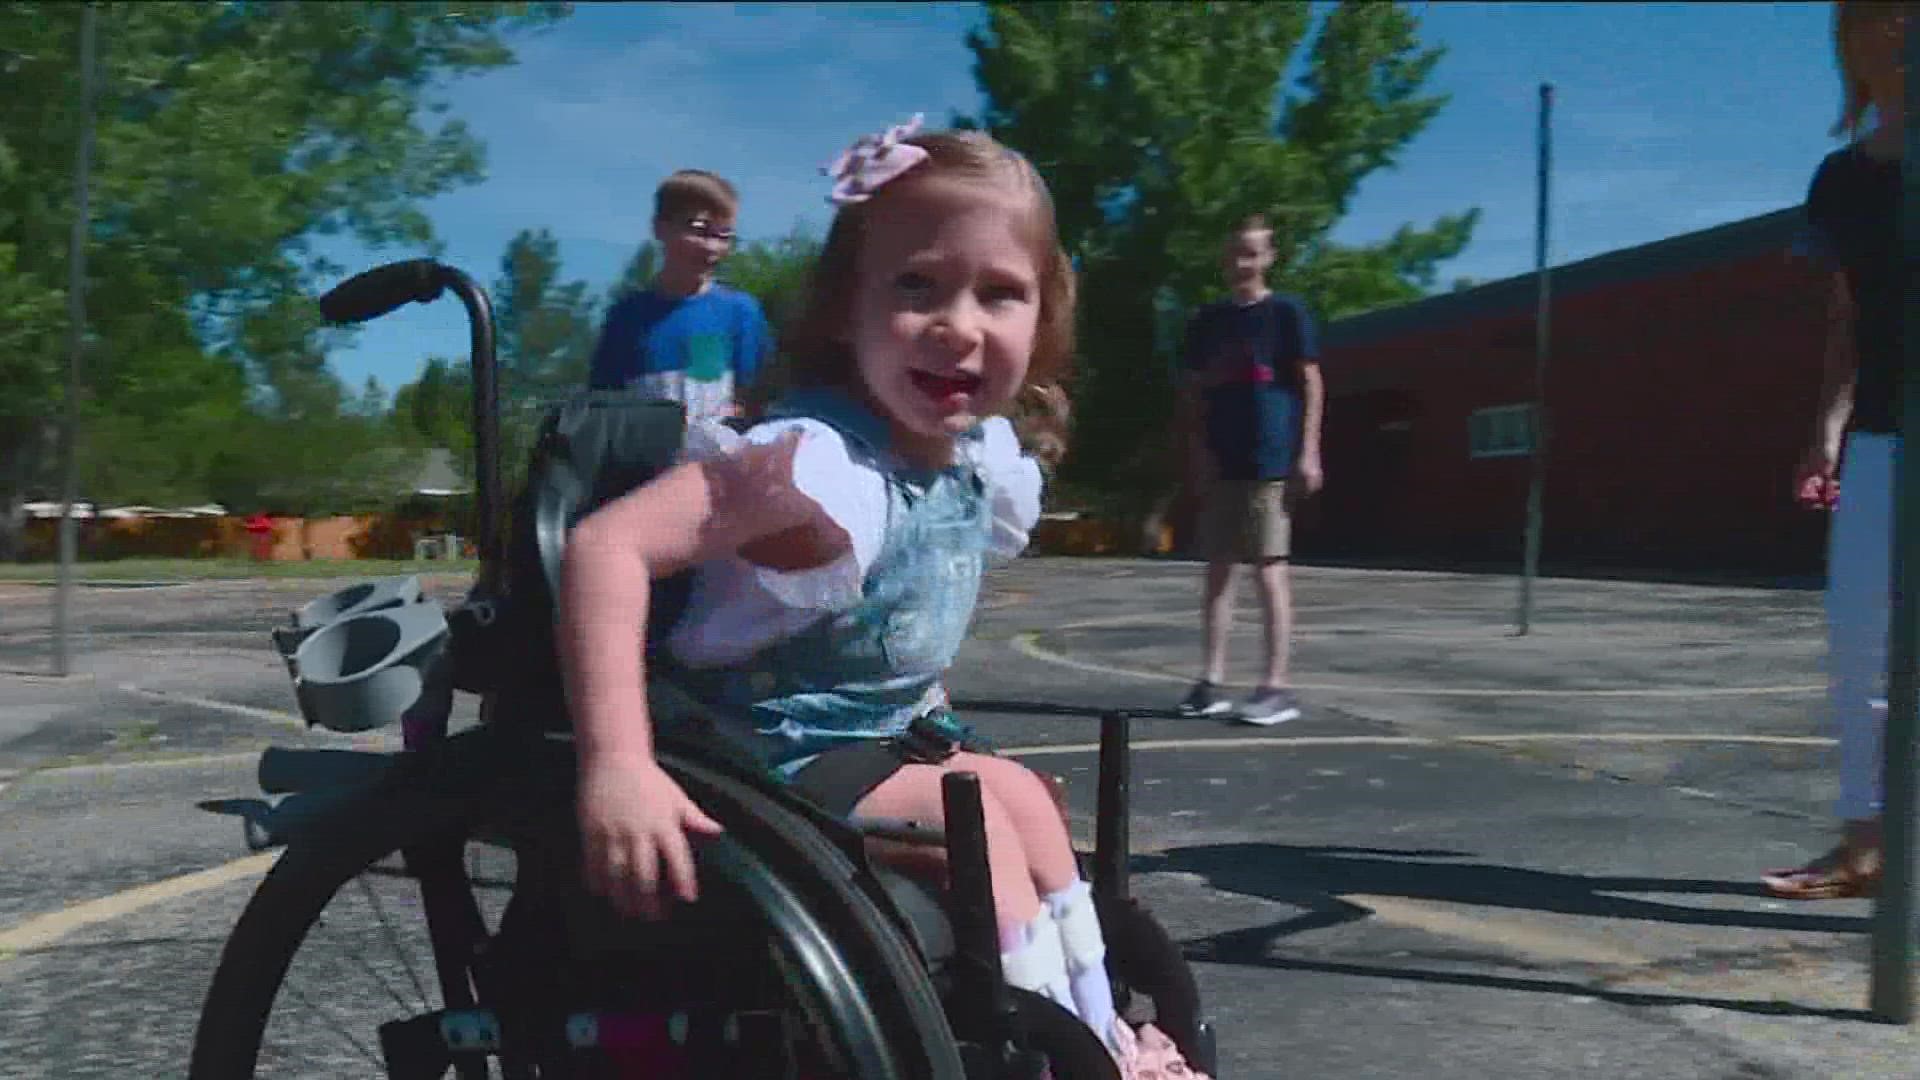 Katie Stewart wants her daughter to be able to play with her friends on the playground at school, but right now the playground isn't wheelchair accessible.